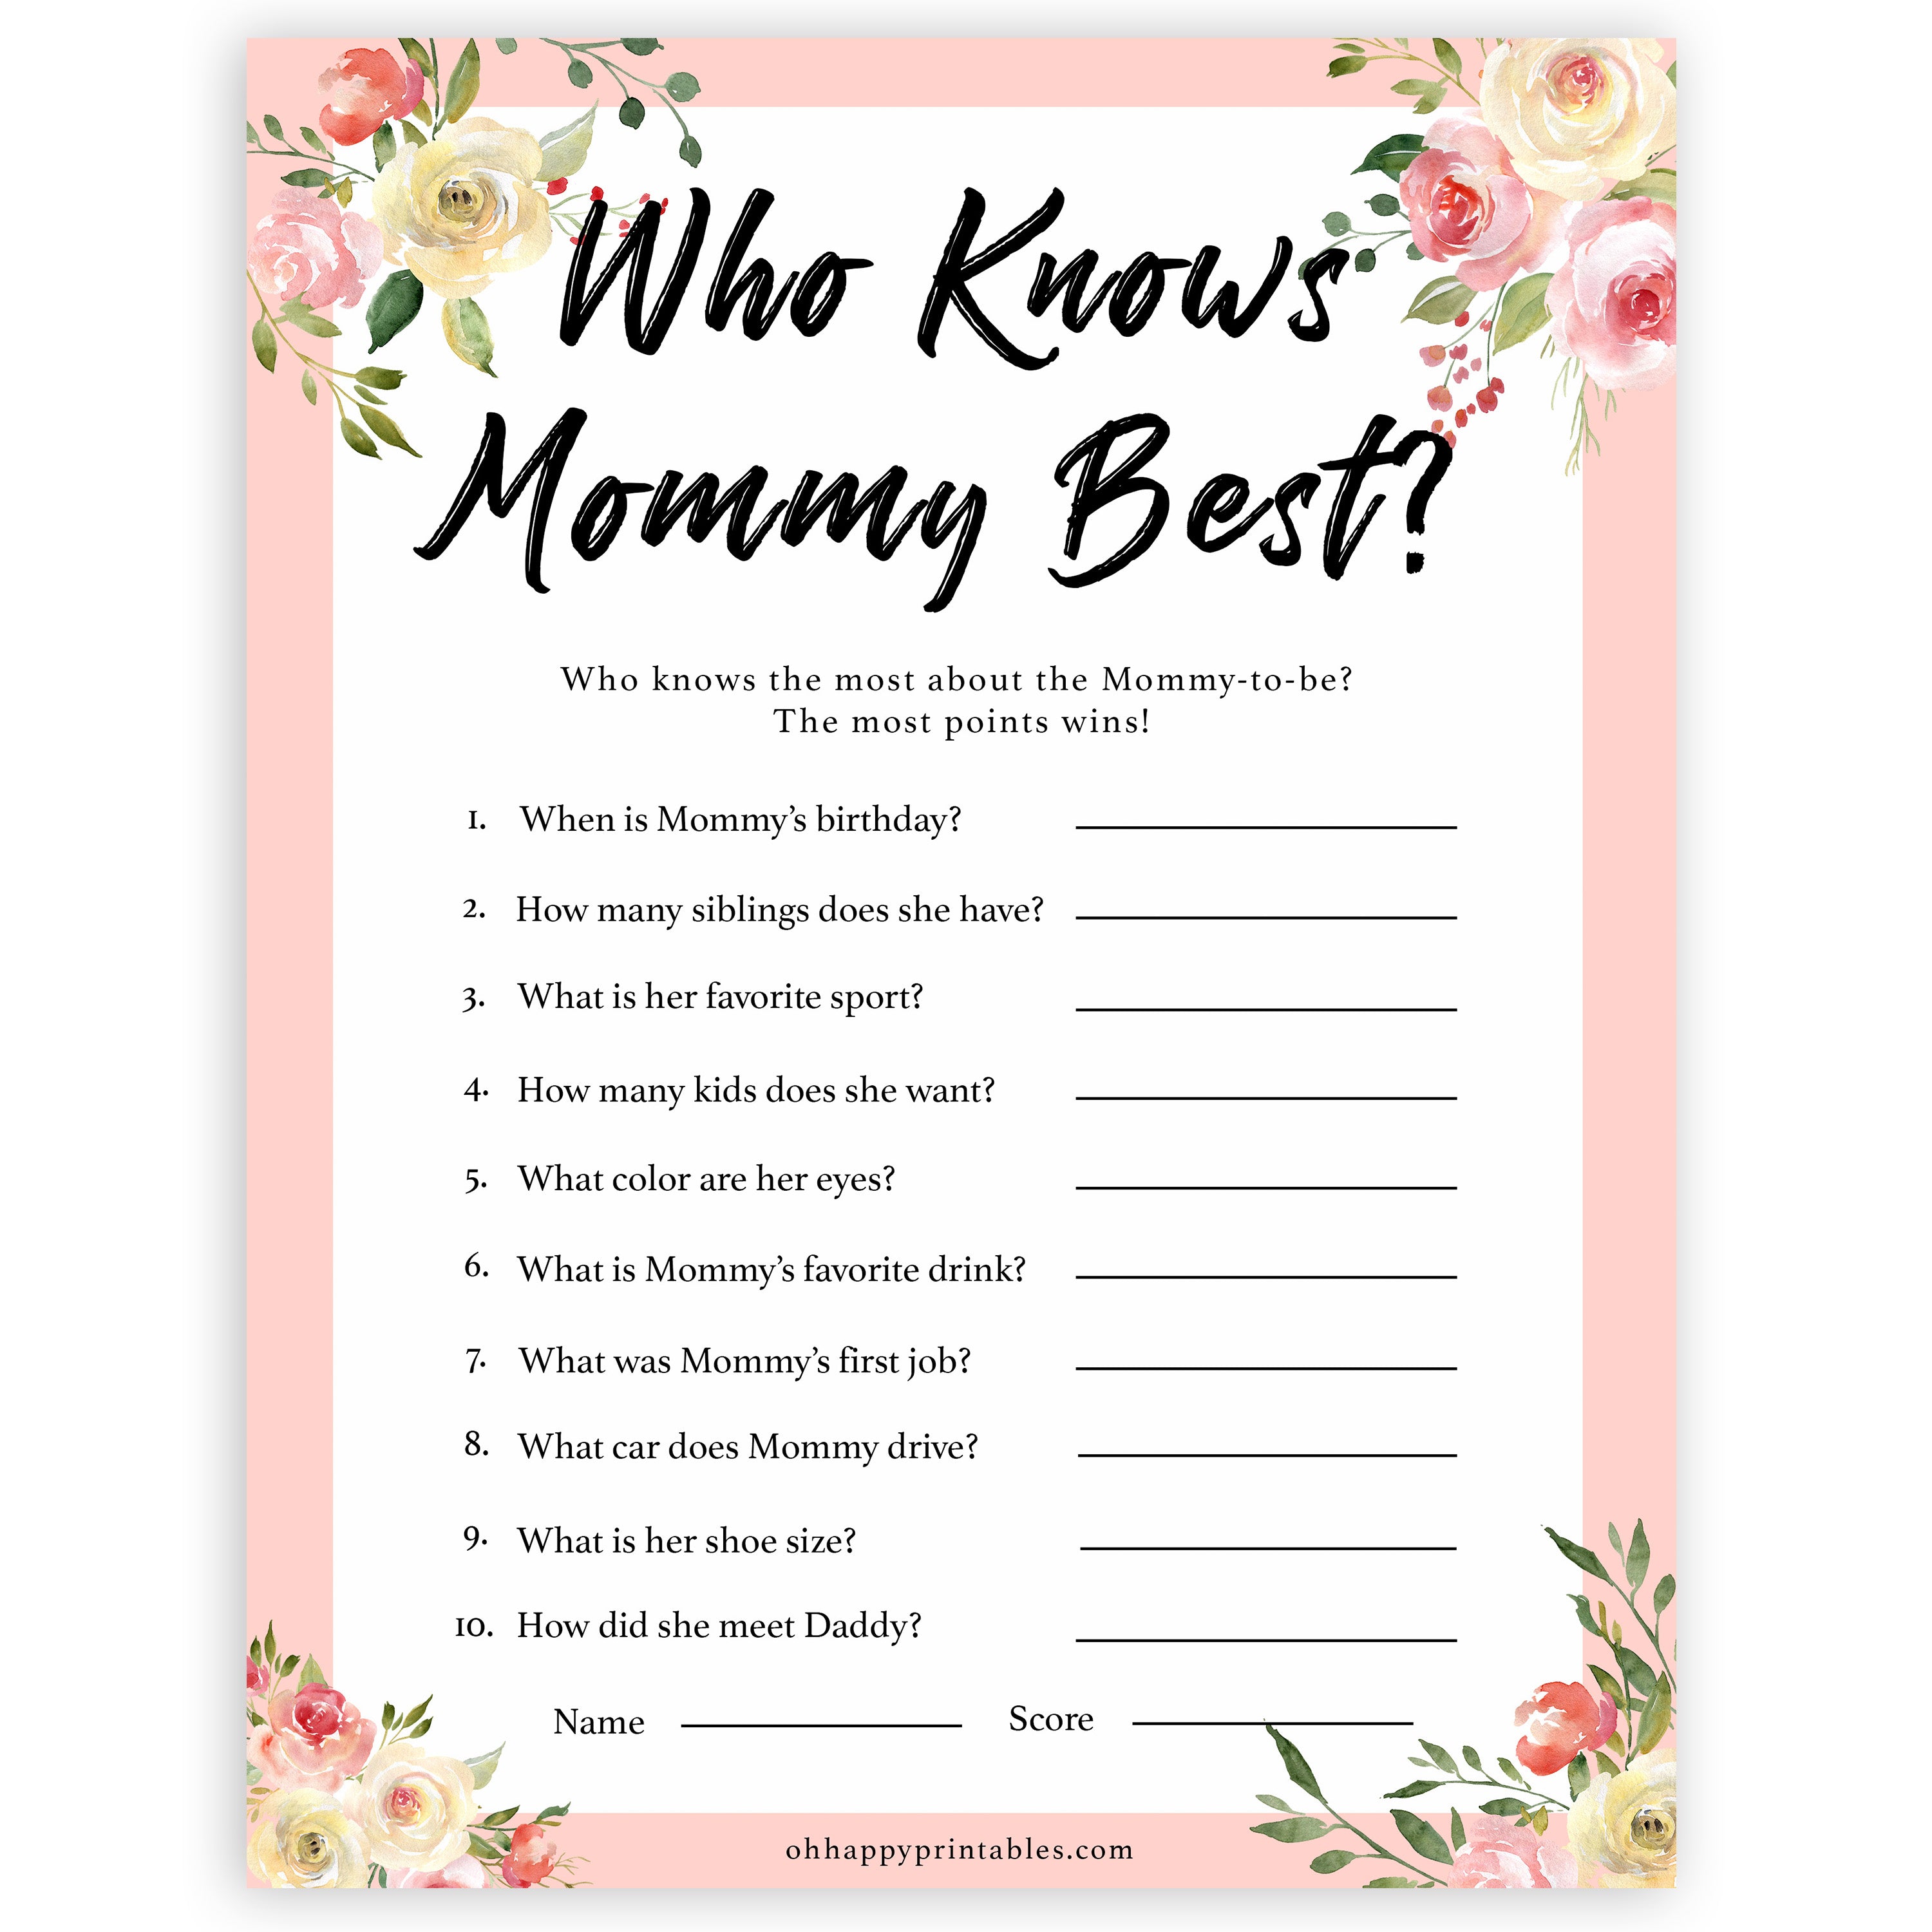 spring floral who knows mummy best baby shower games, printable baby shower games, fun baby shower games, baby shower games, popular baby shower games